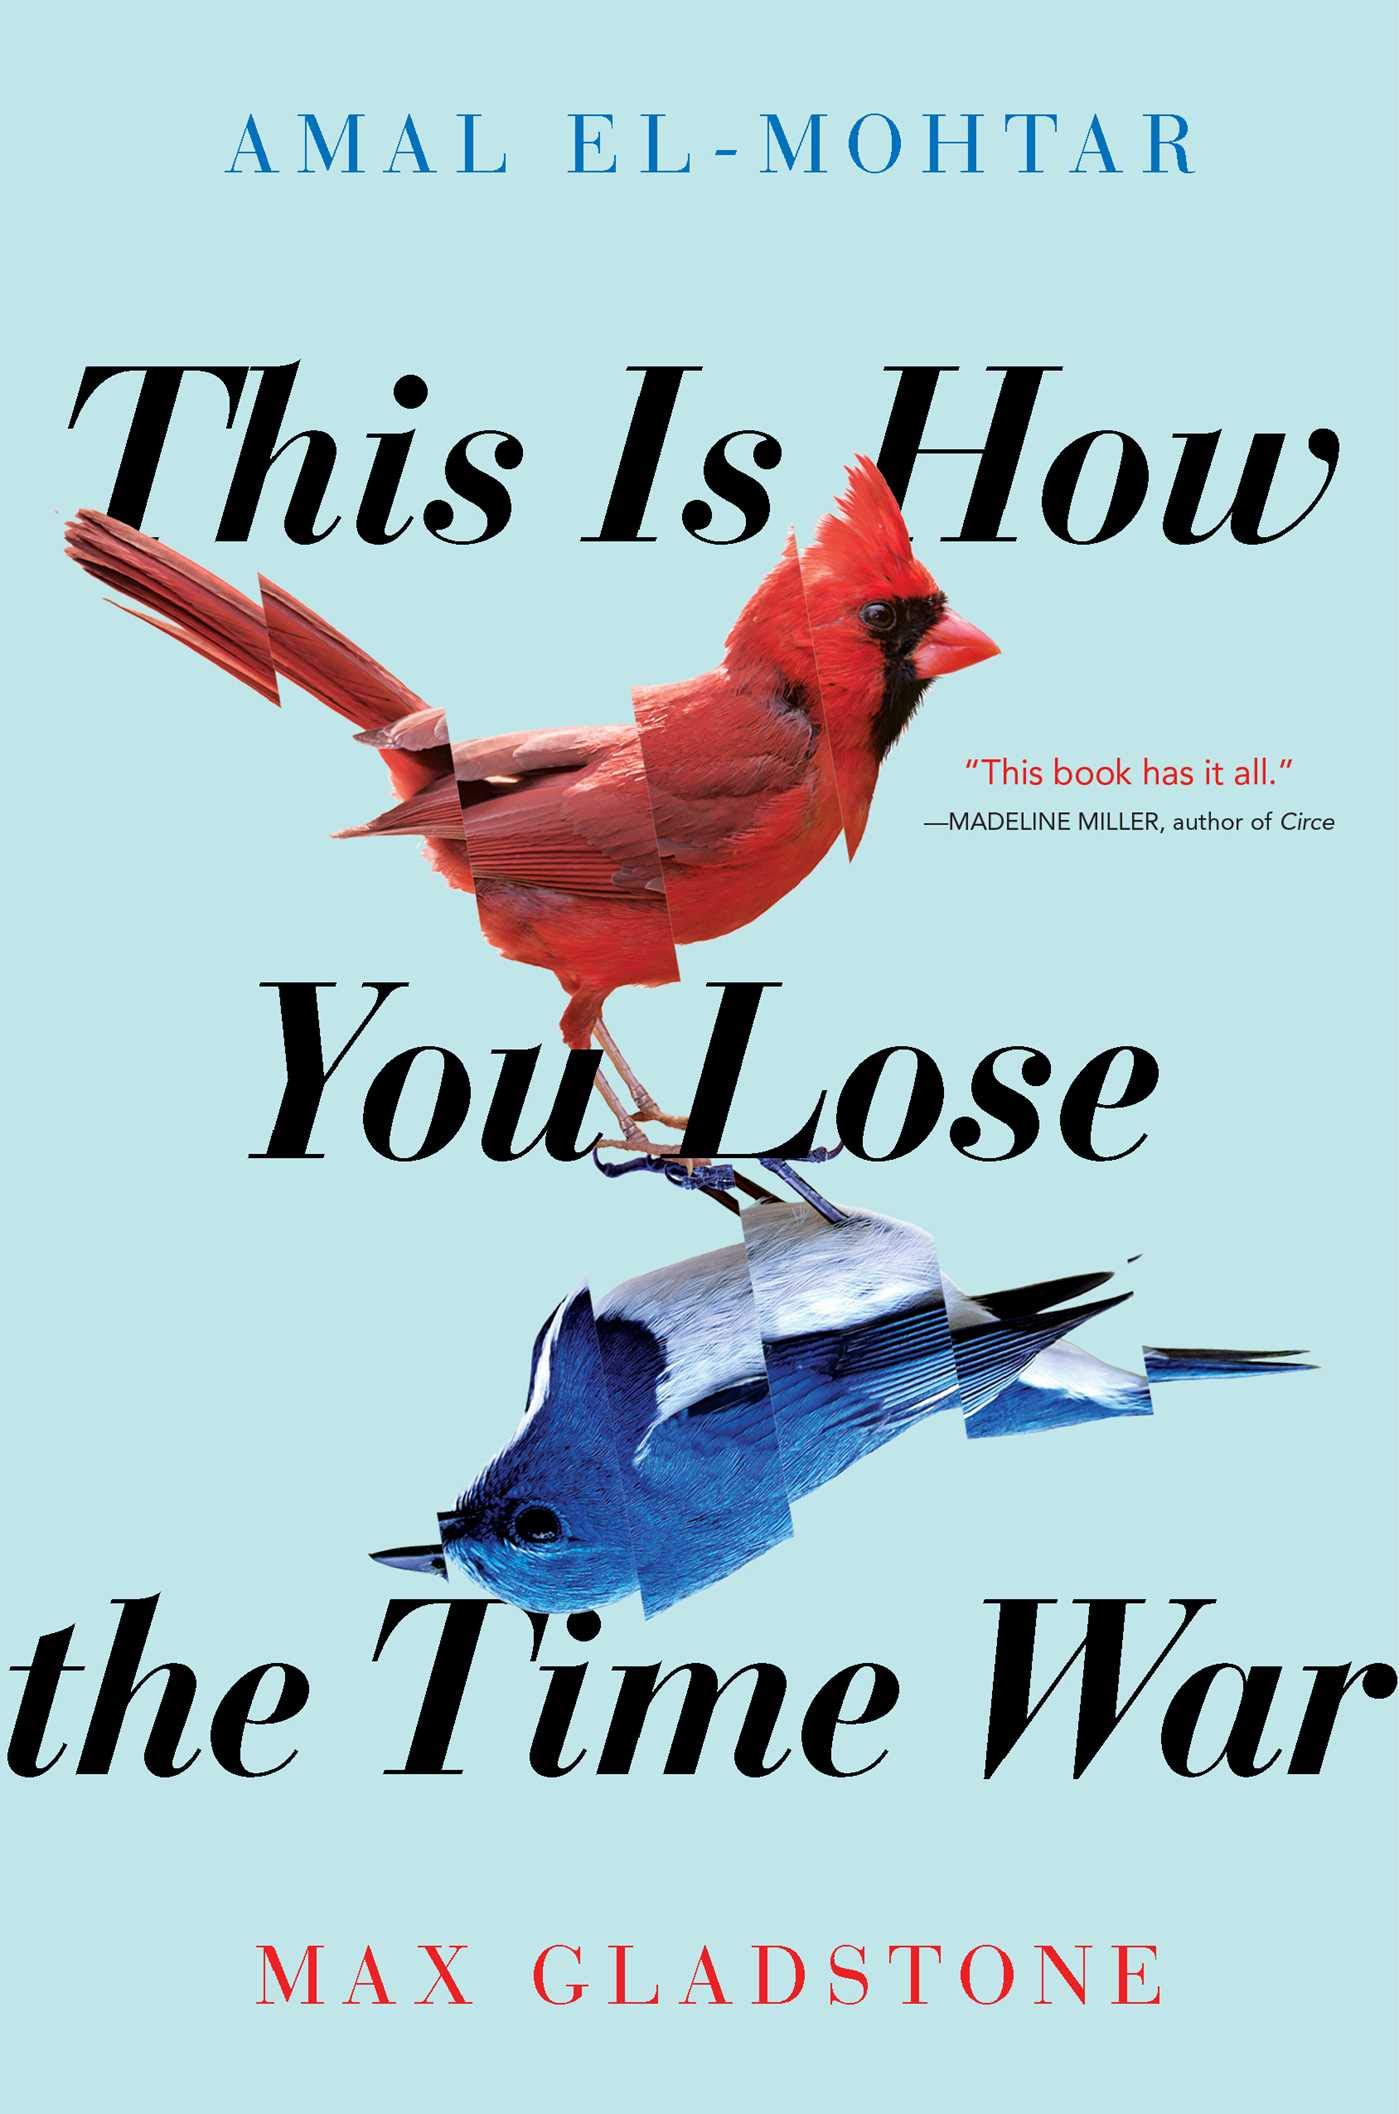 Image for "This Is How You Lose the Time War"